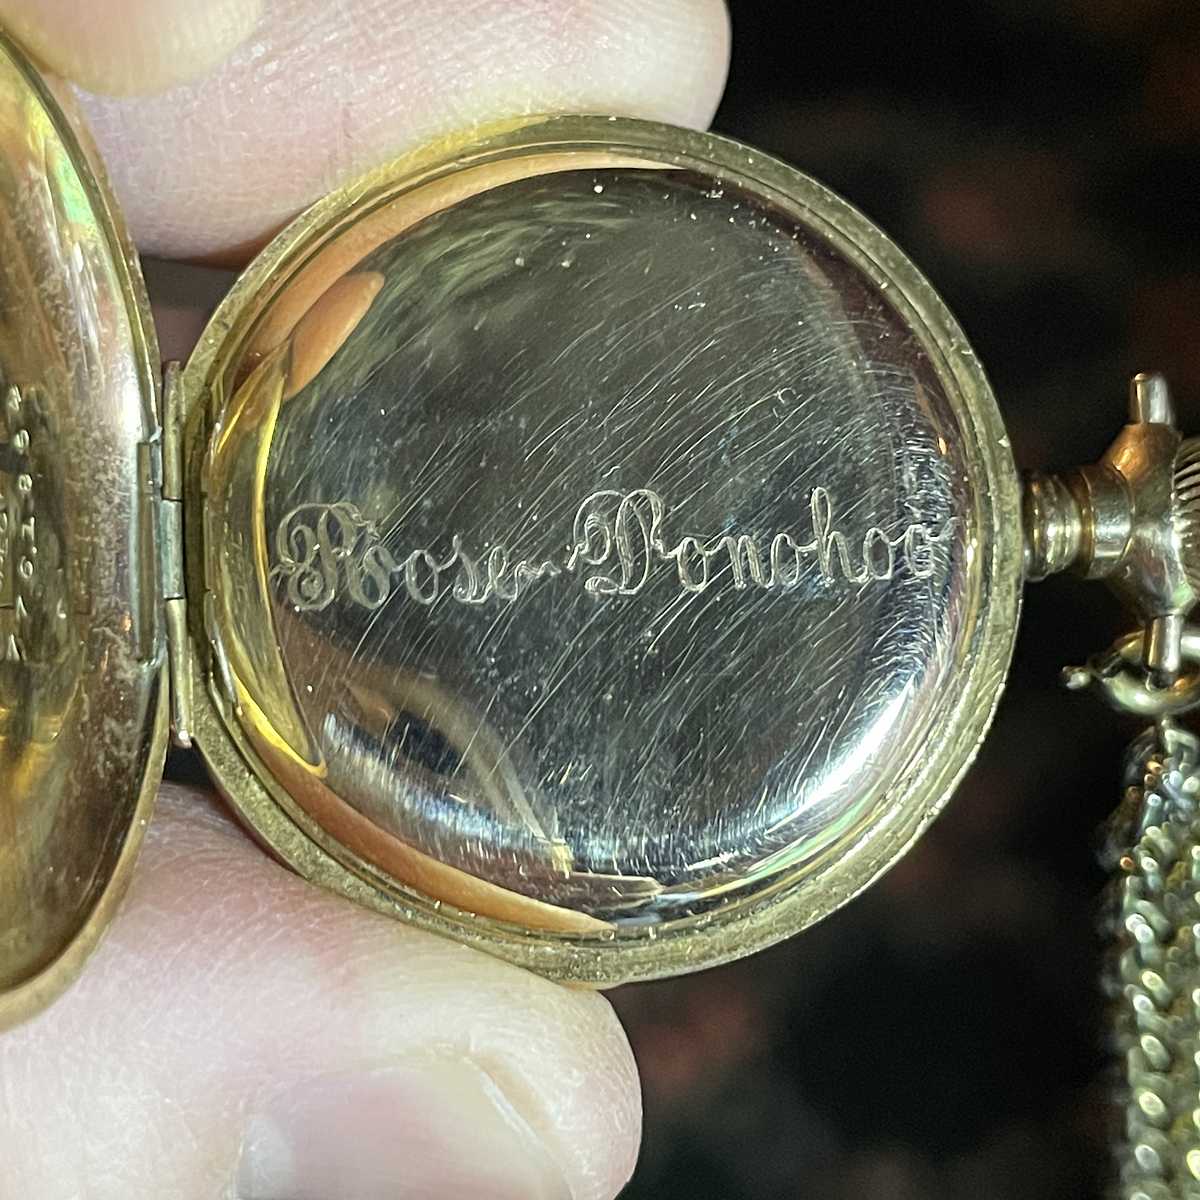 1911 South Bend Watch Grade Unknown Engraving on the original pocket watch case